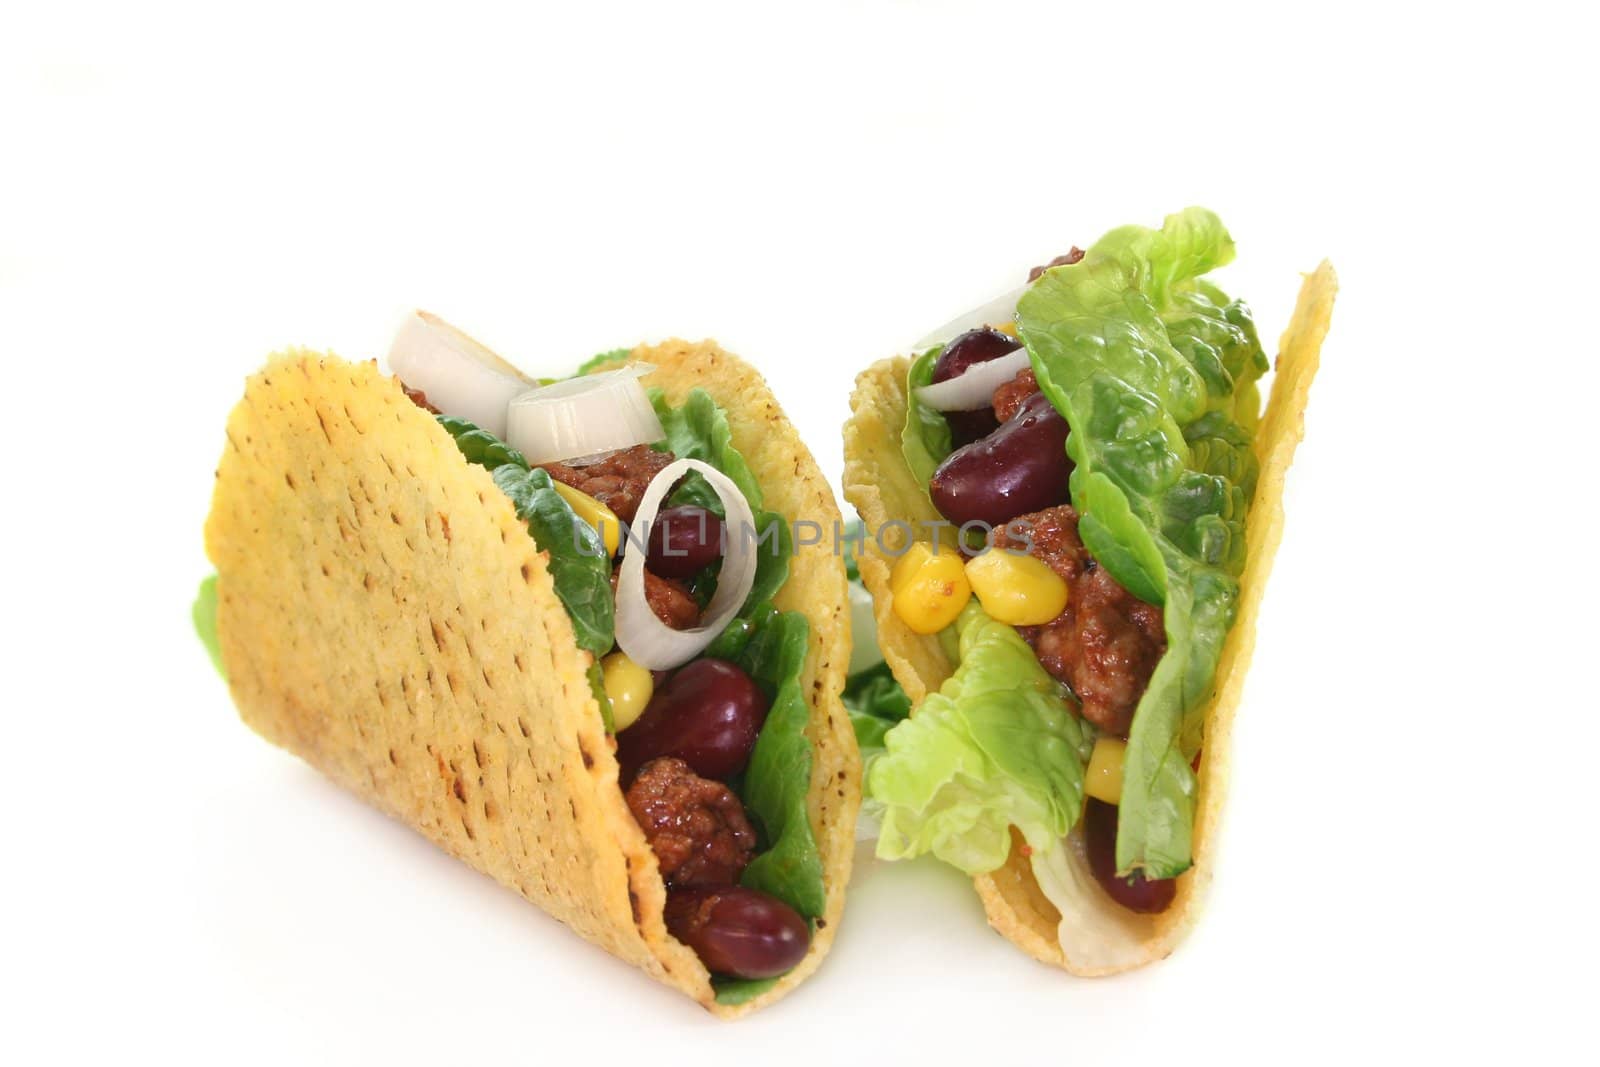 Taco shells filled with ground beef, kidney beans and corn
